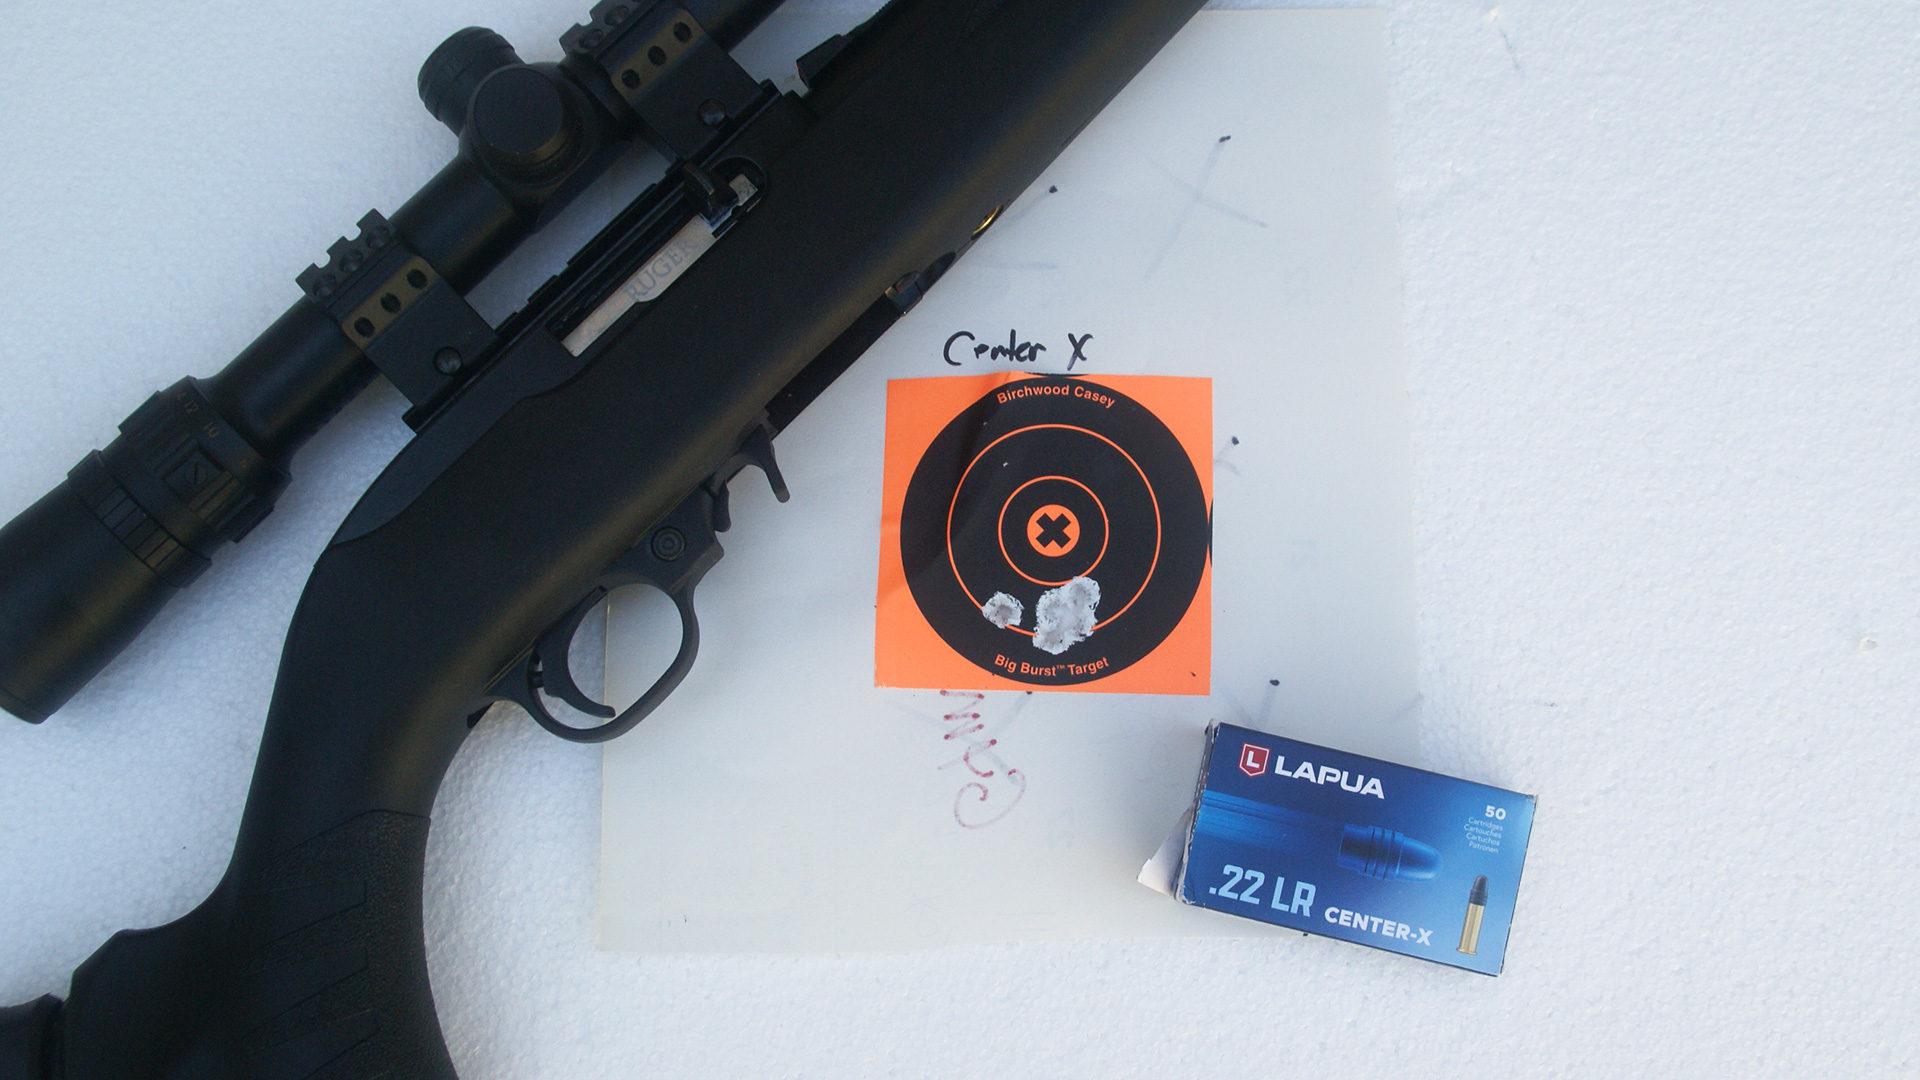 Ruger 10/22 Compact and Lapua Center-X .22 LR